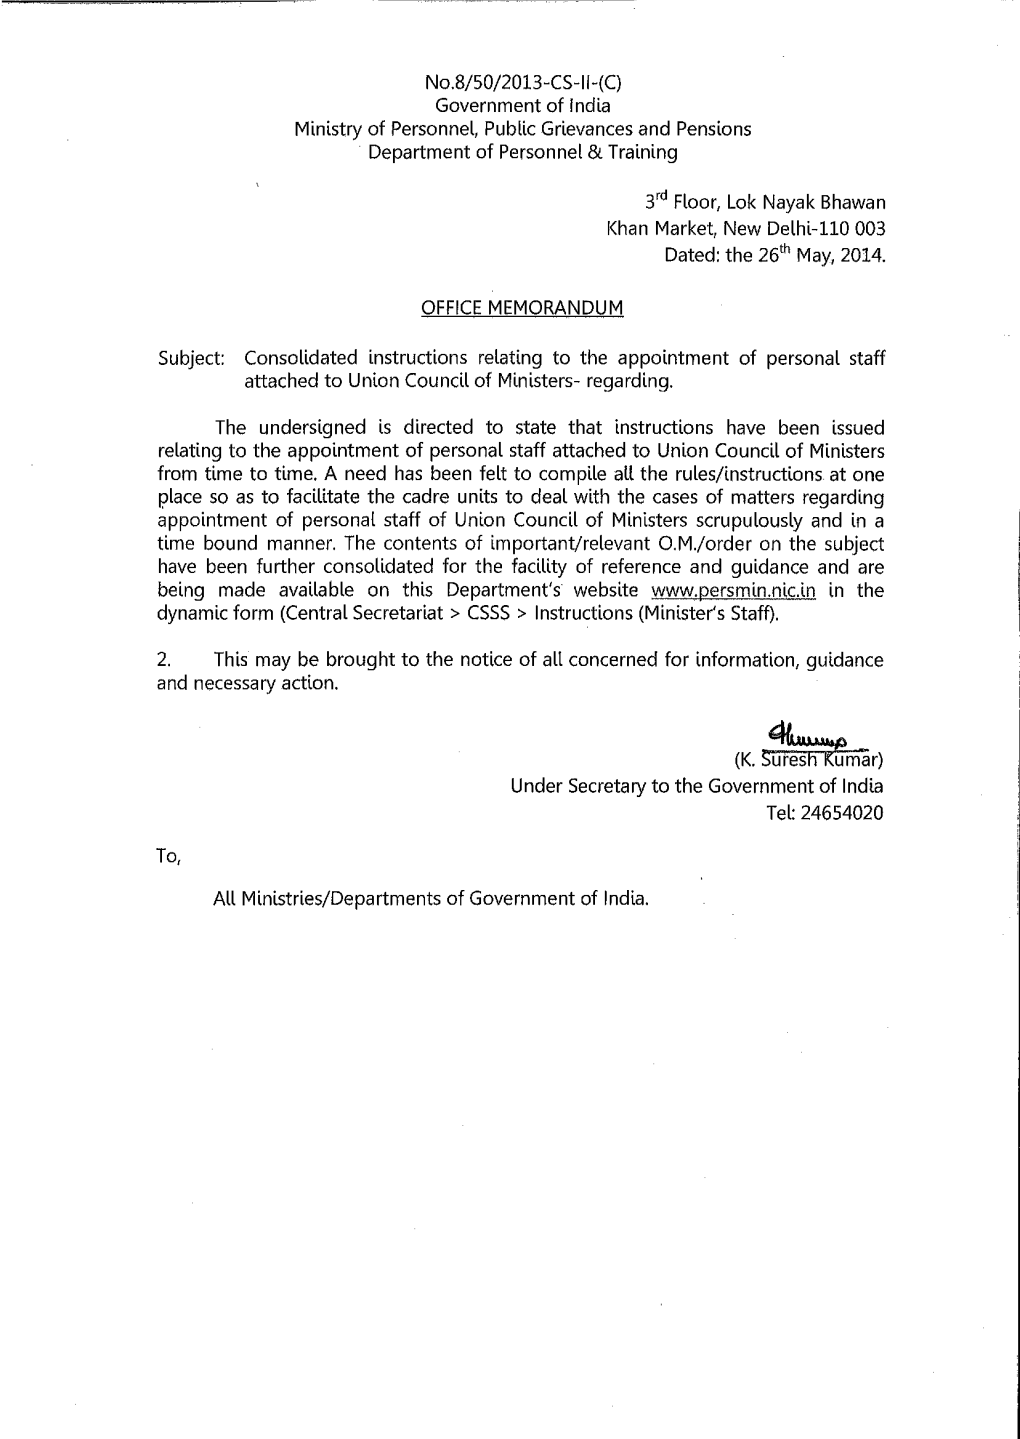 Consolidated Instructions- Entitlement of Personal Staff of Ministers